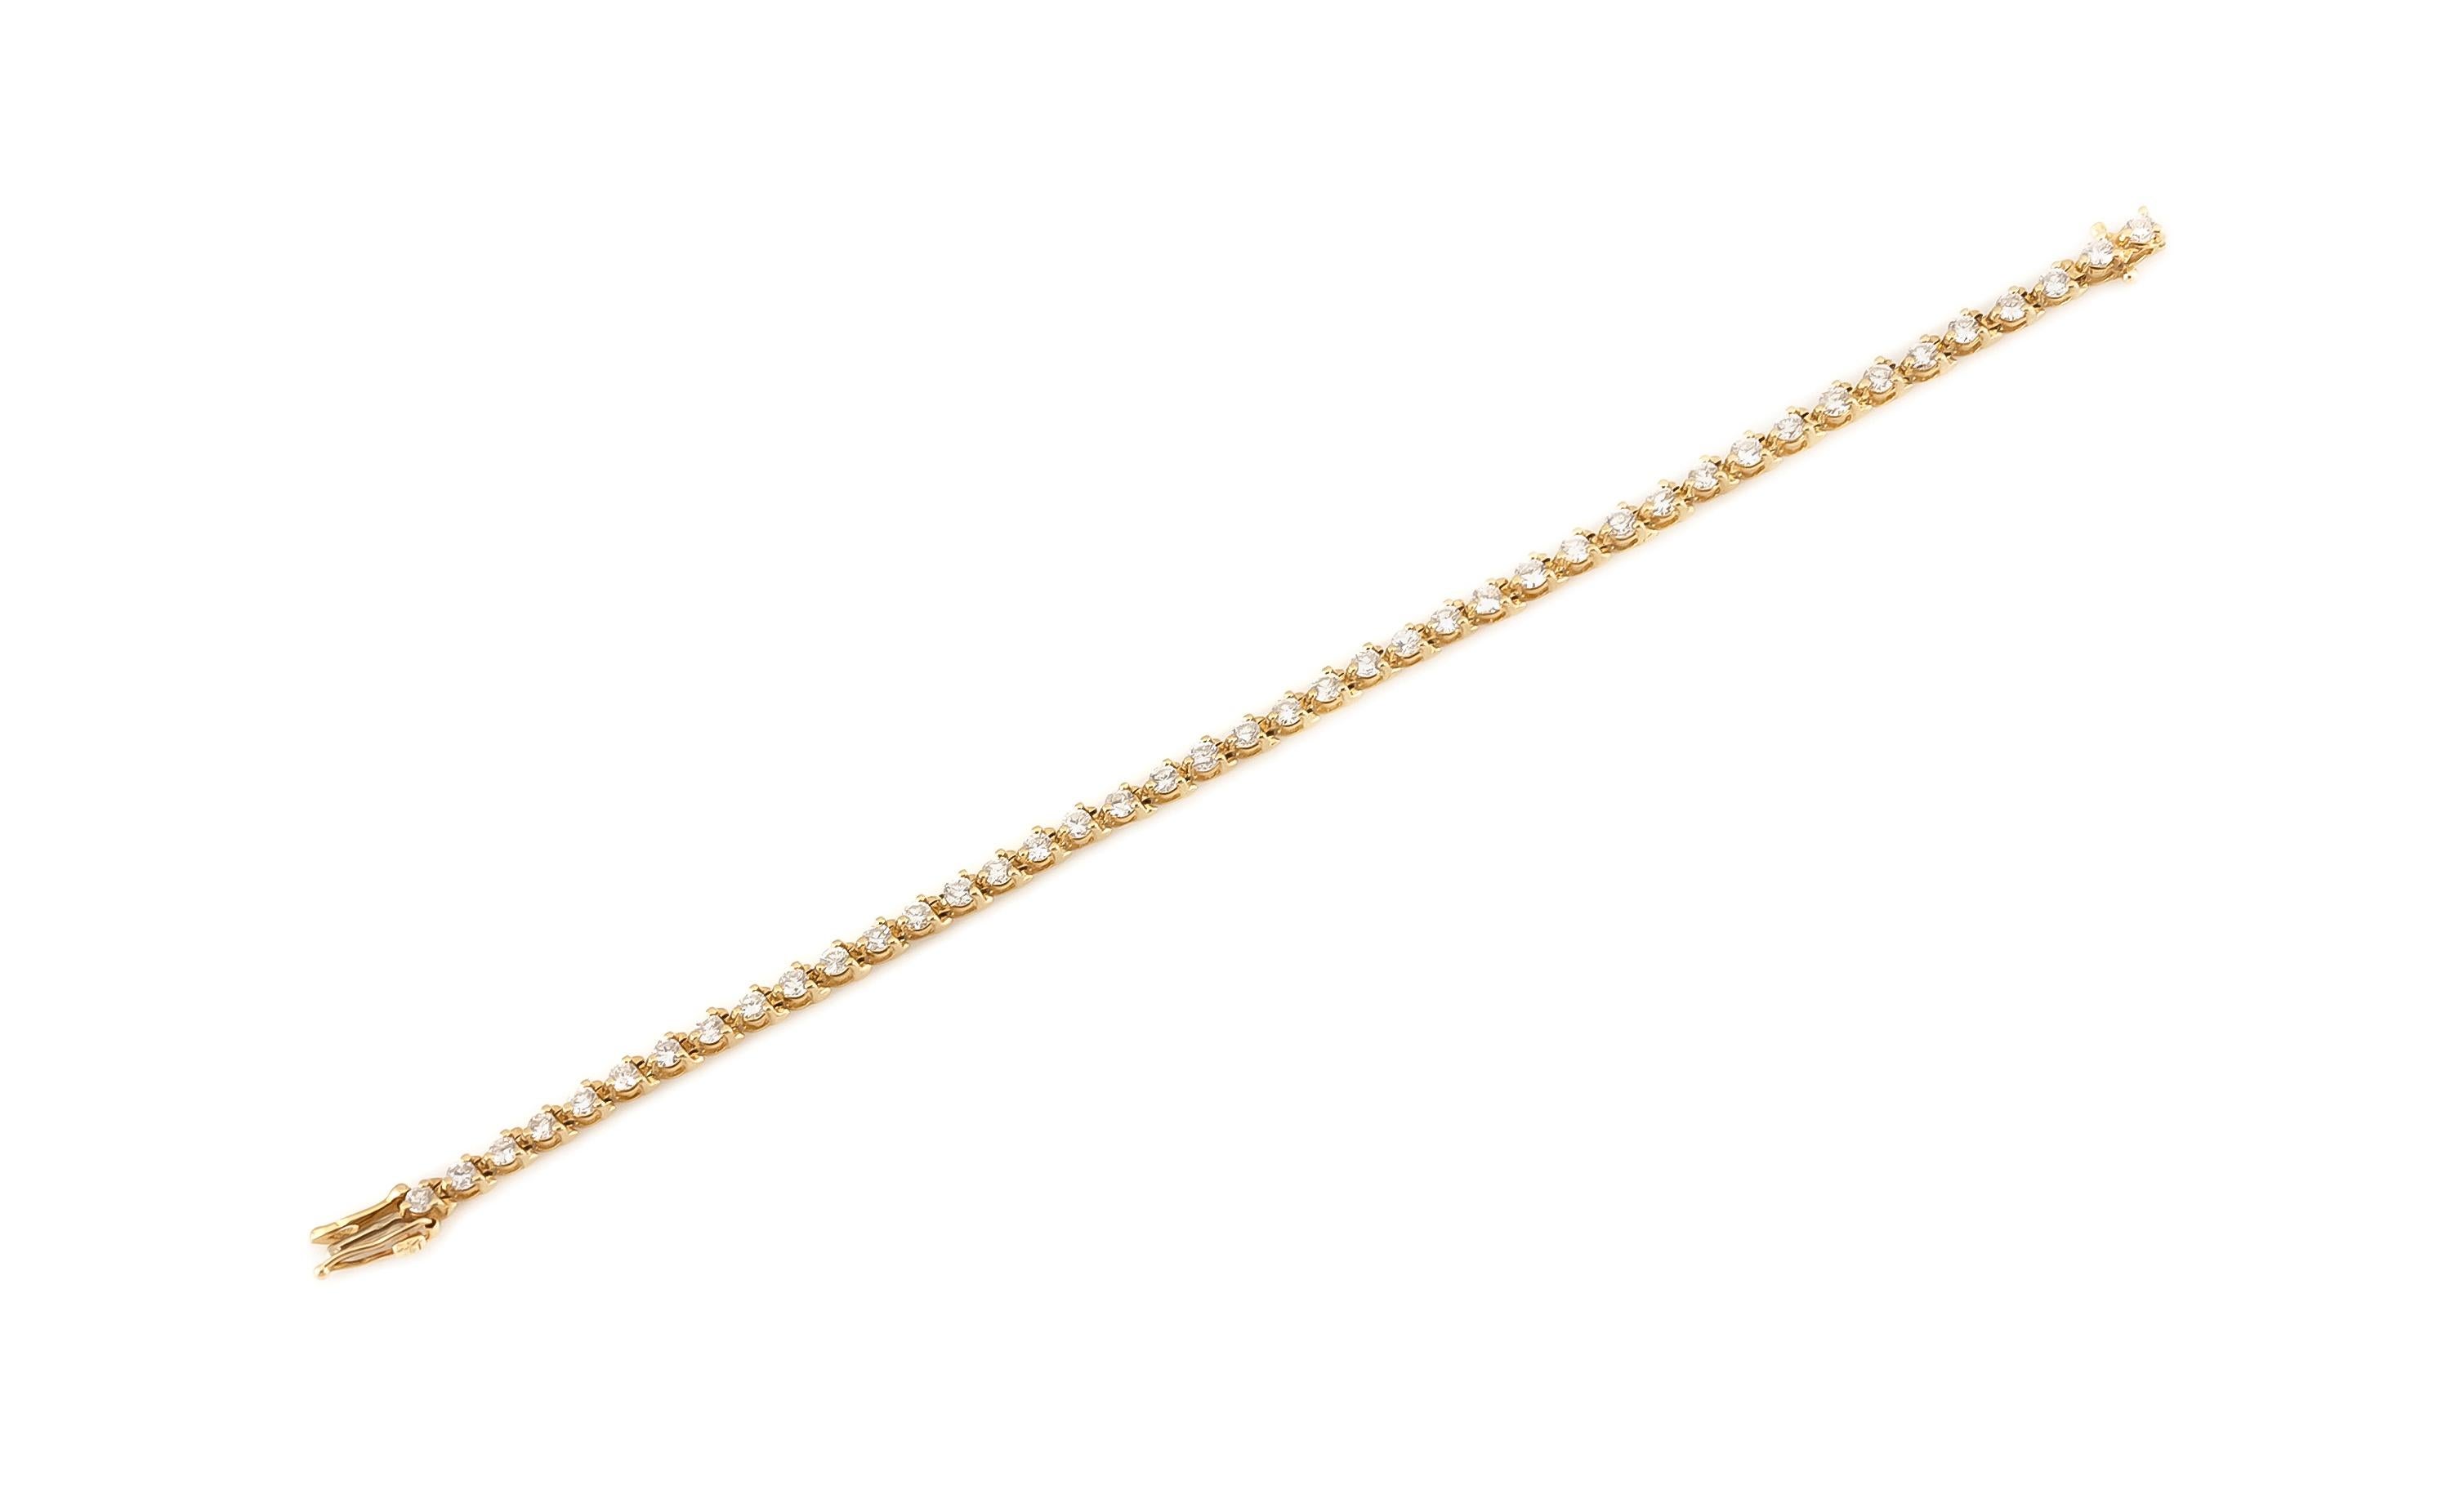 The bracelet is finely crafted in 14k yellow gold with round diamonds weighing approximately total of 2.50 carat.
Circa 2000.
